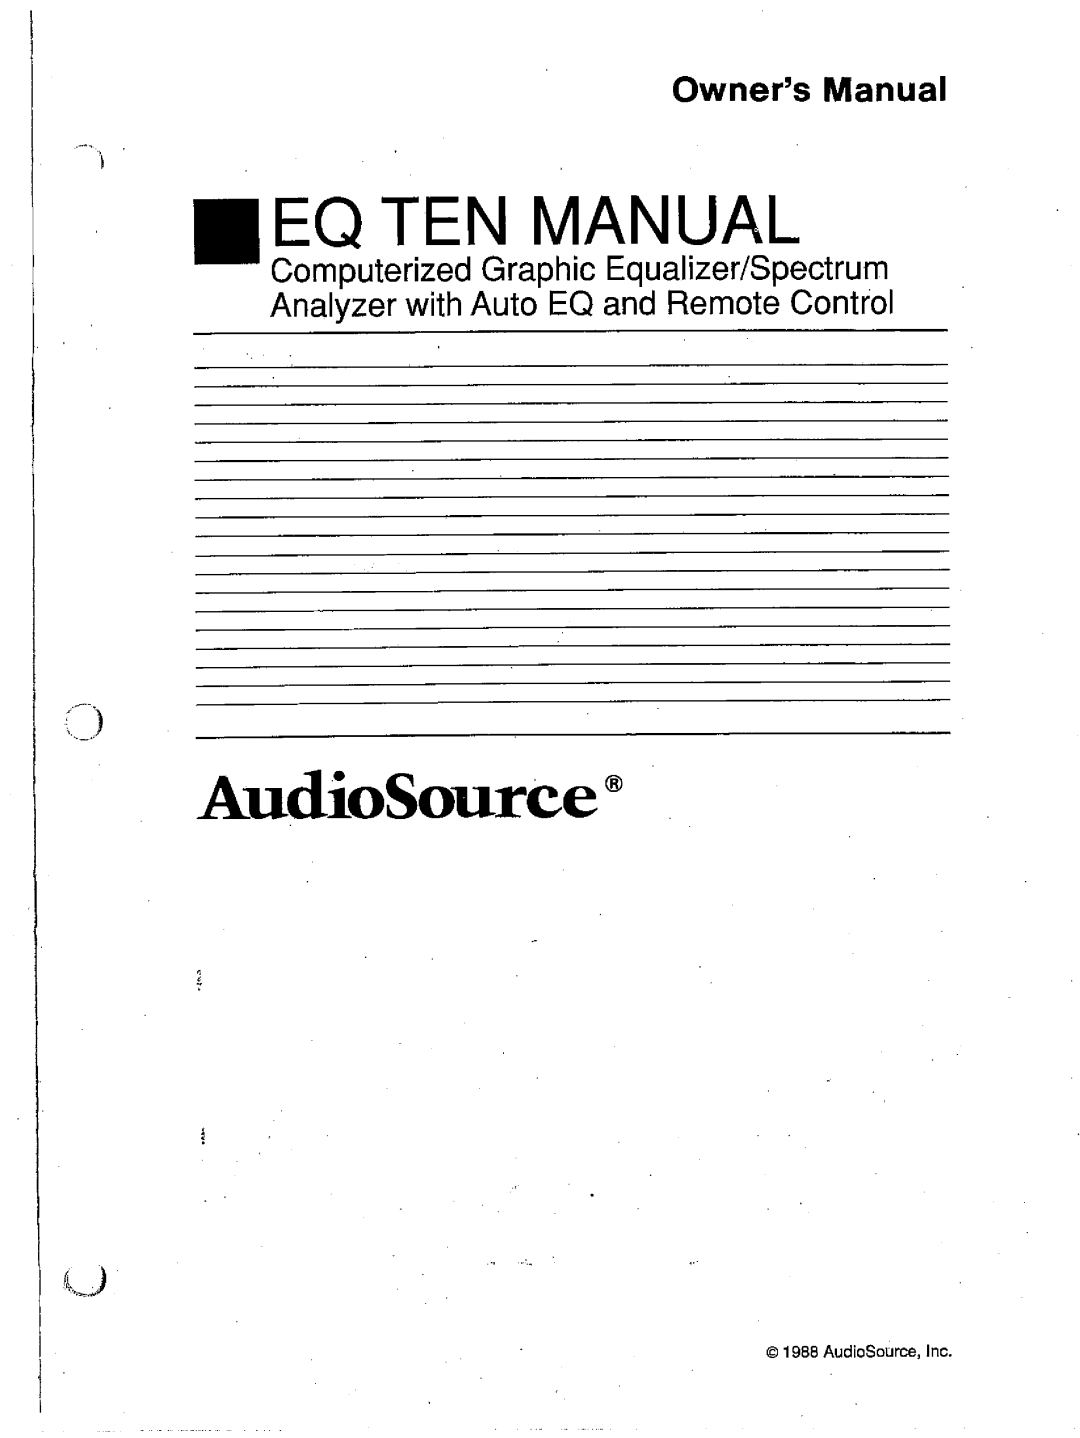 AudioSource Computerized Graphic Equalizer/Spectrum Analyzer with Auto EQ and Remote Control, EQ Ten manual 